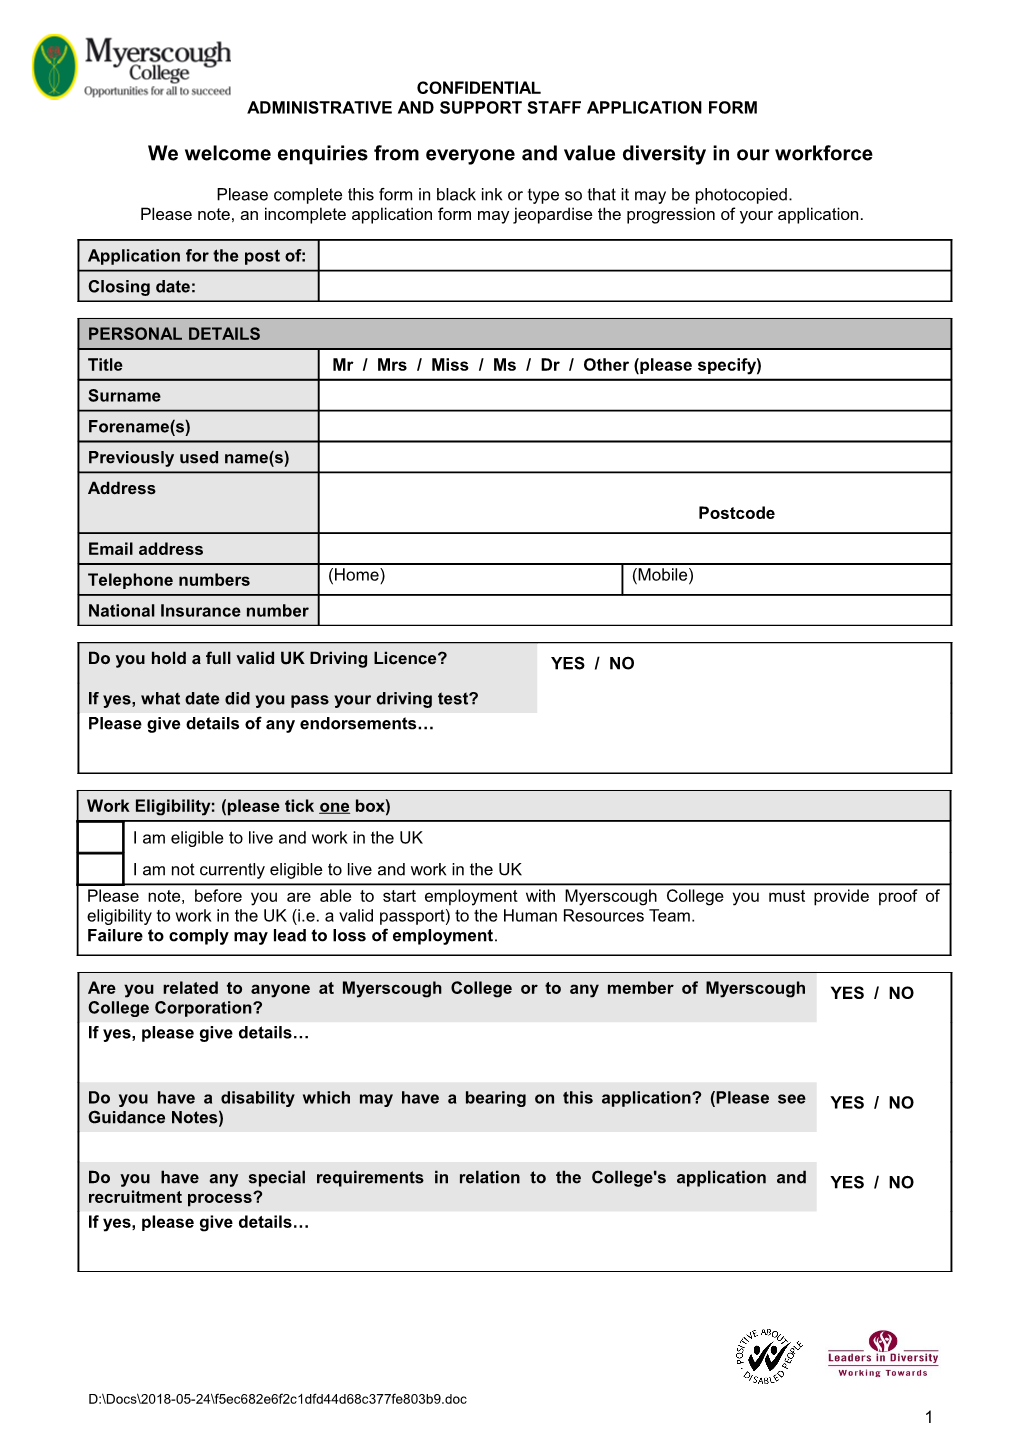 Administrative and Support Staff Application Form